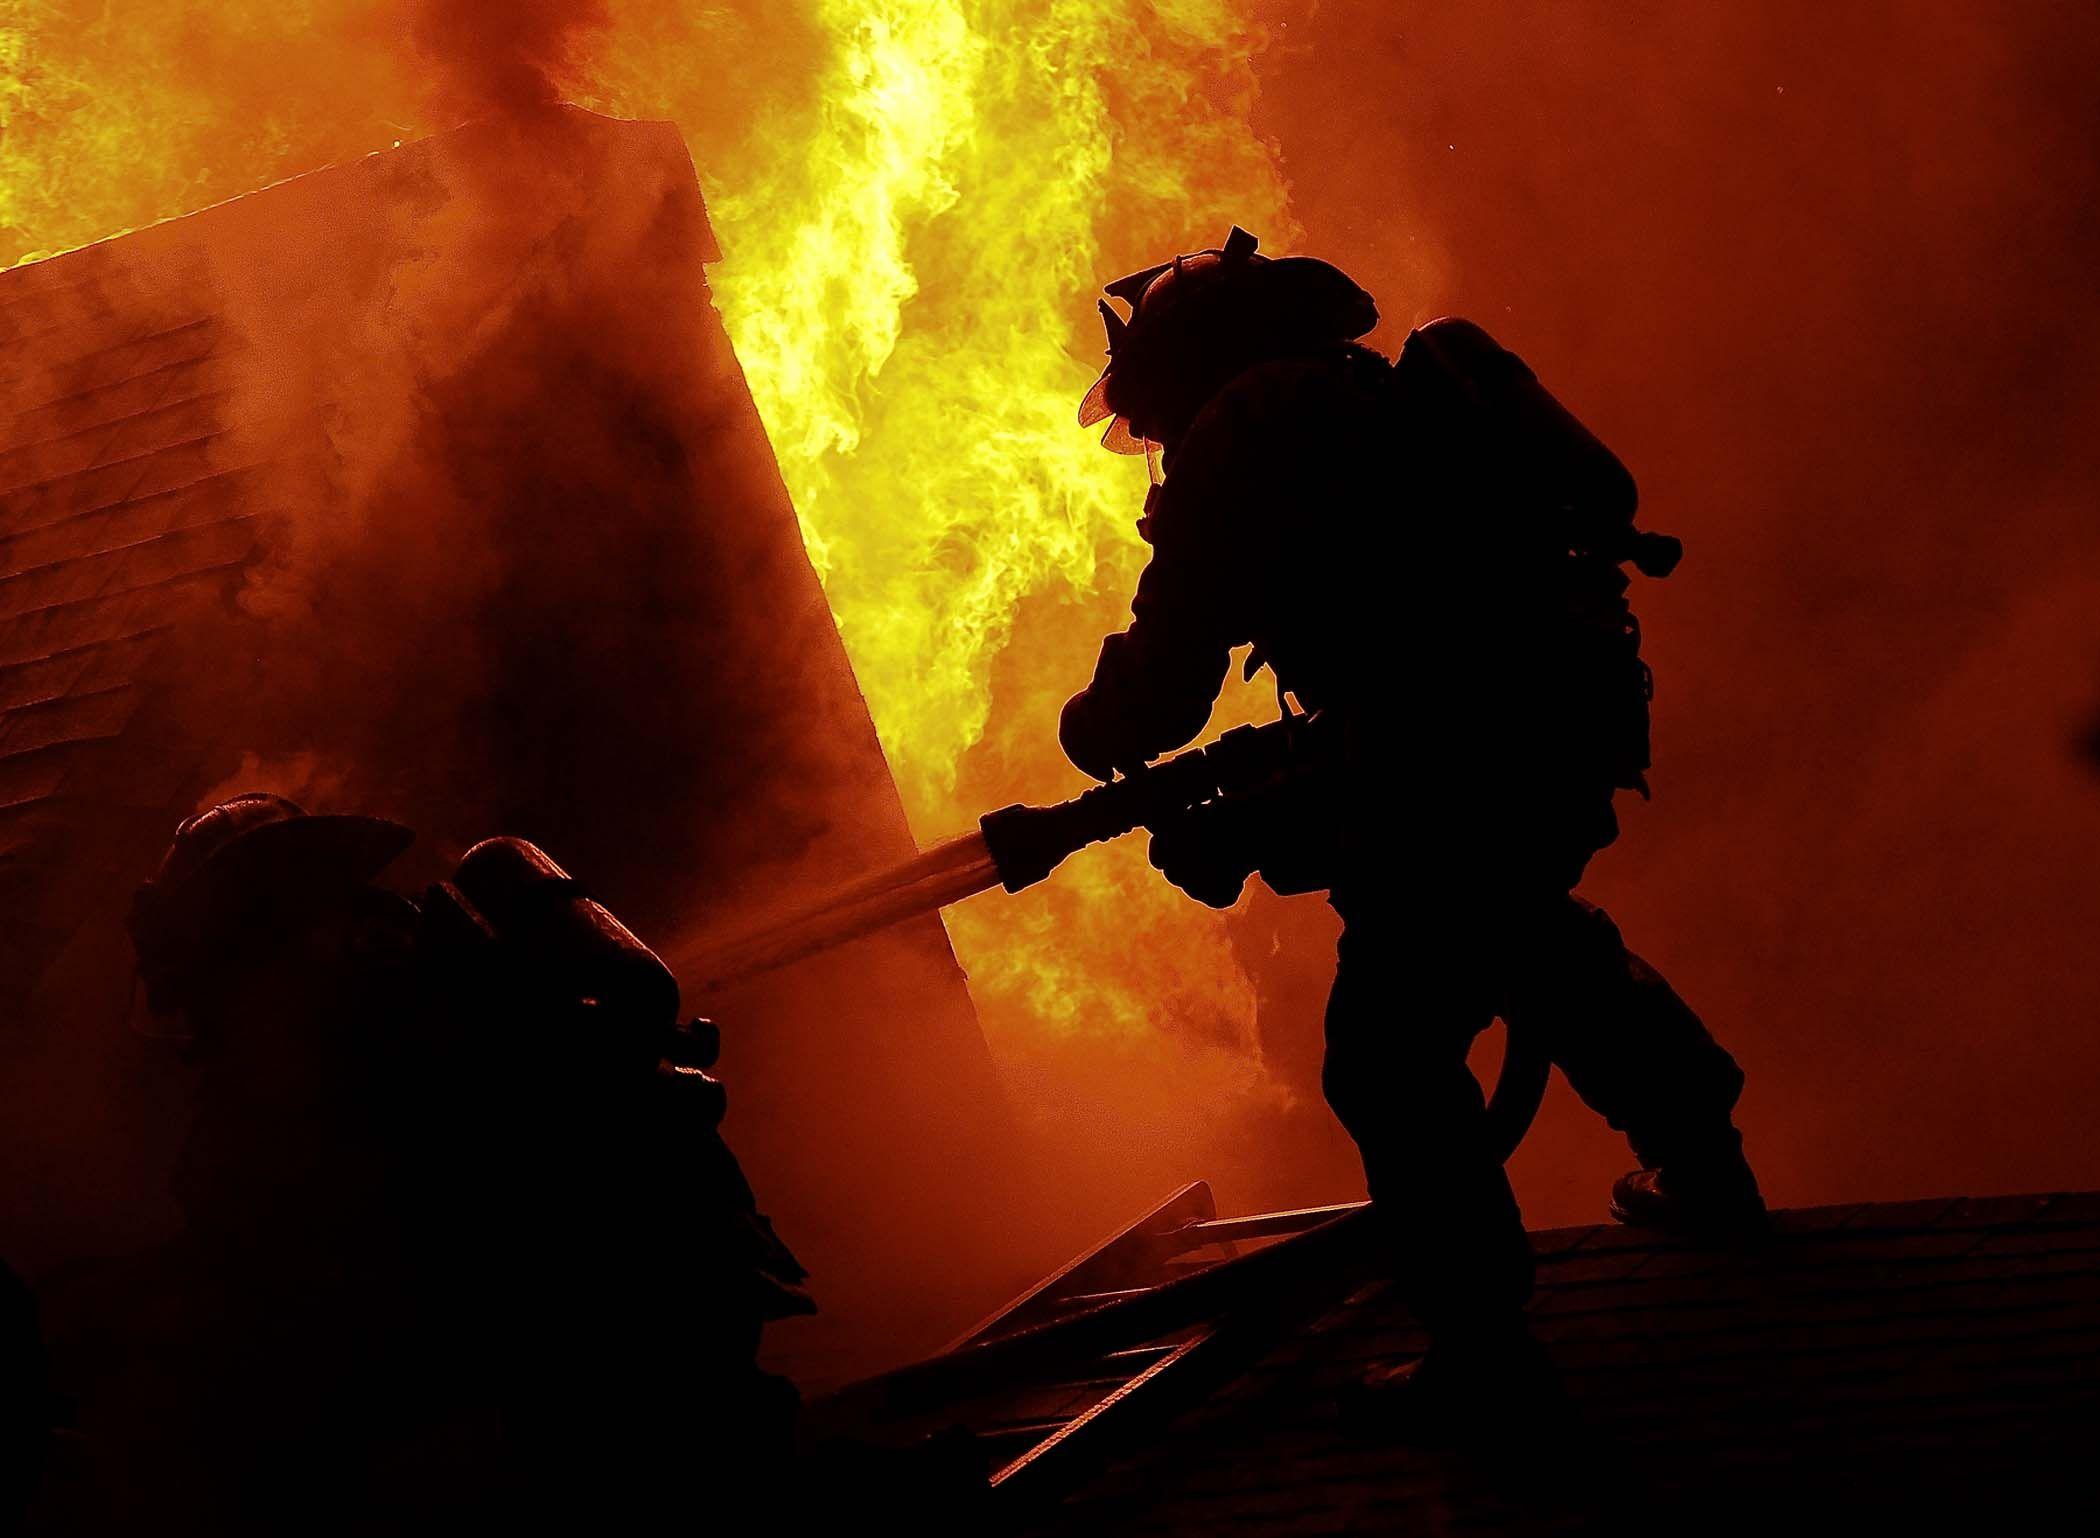 Firefighters Photos Download The BEST Free Firefighters Stock Photos  HD  Images